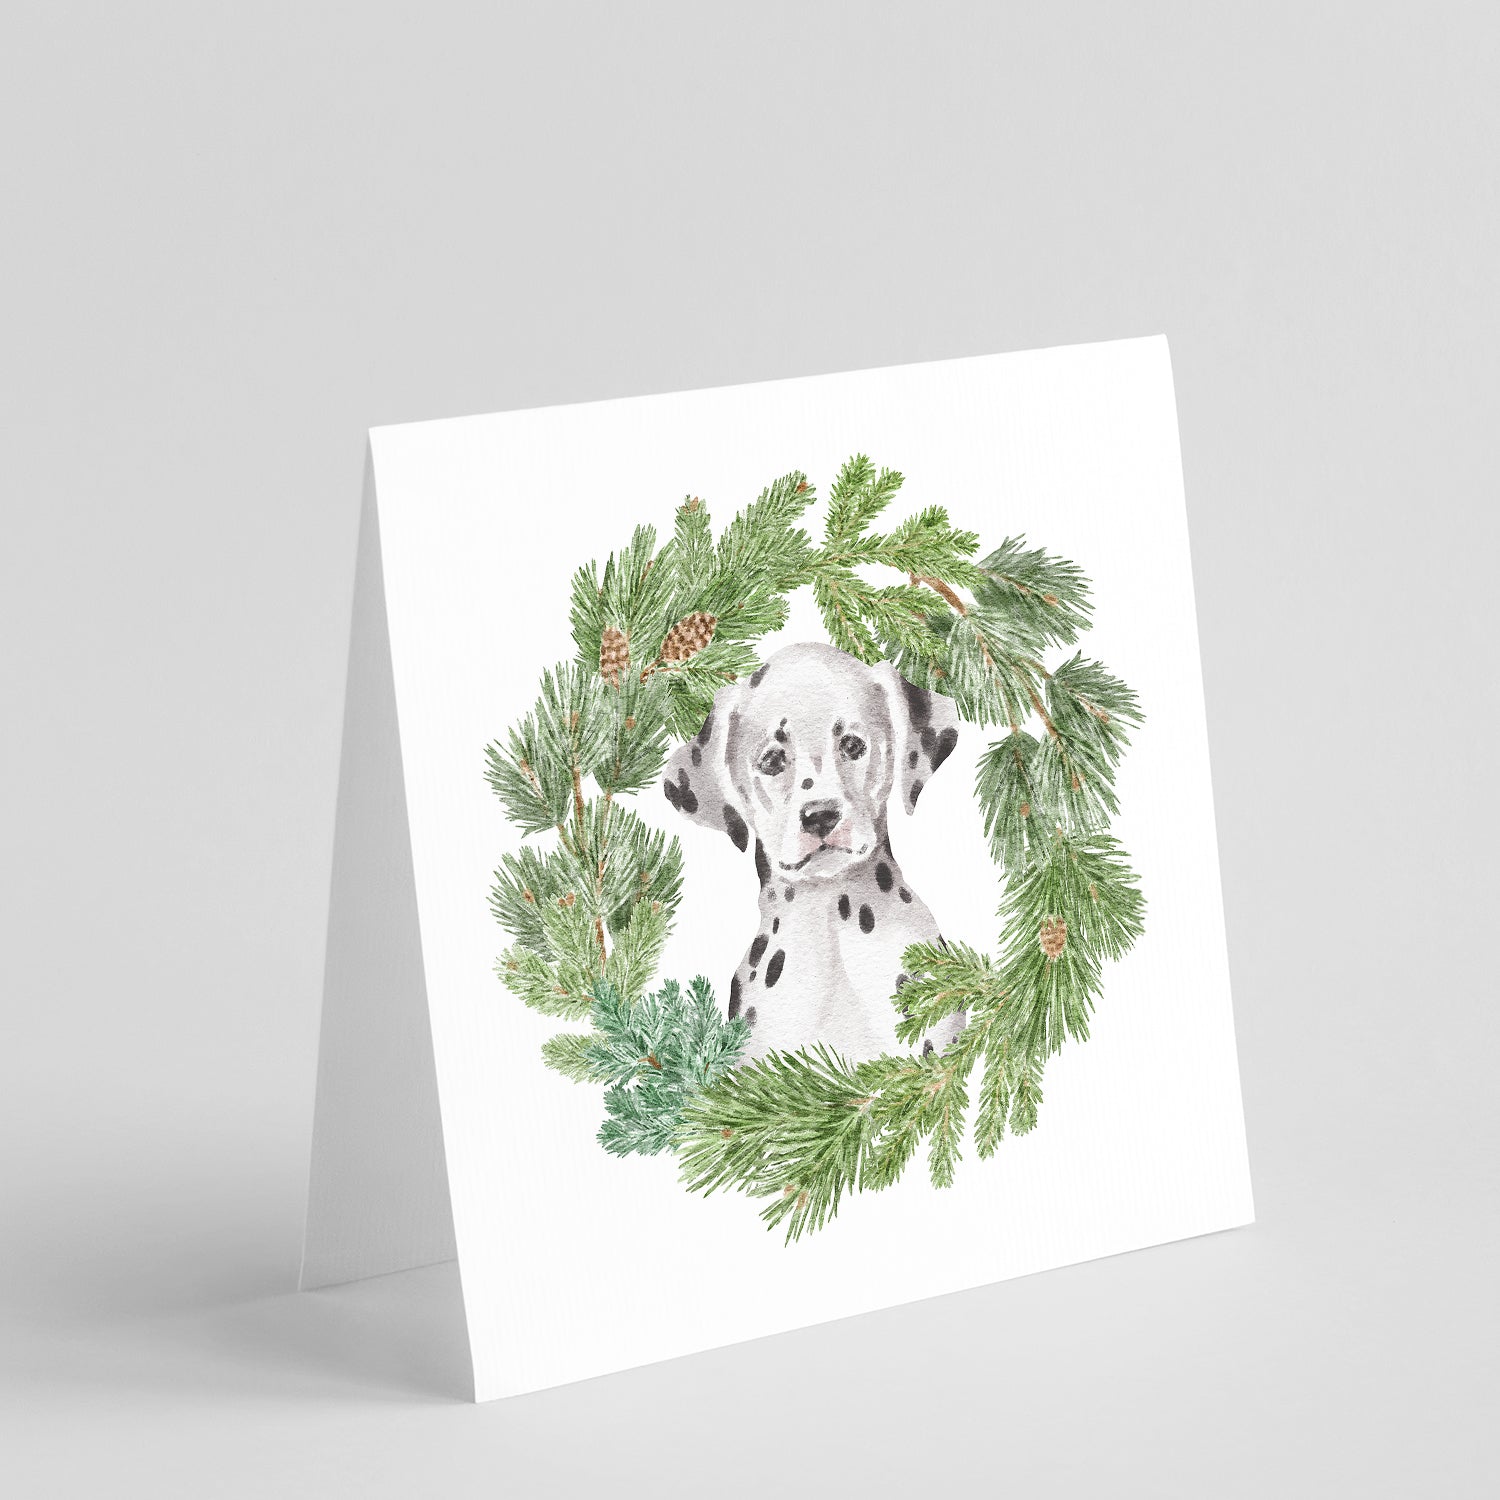 Buy this Dalmatian Puppy Sitting Pretty with Christmas Wreath Square Greeting Cards and Envelopes Pack of 8